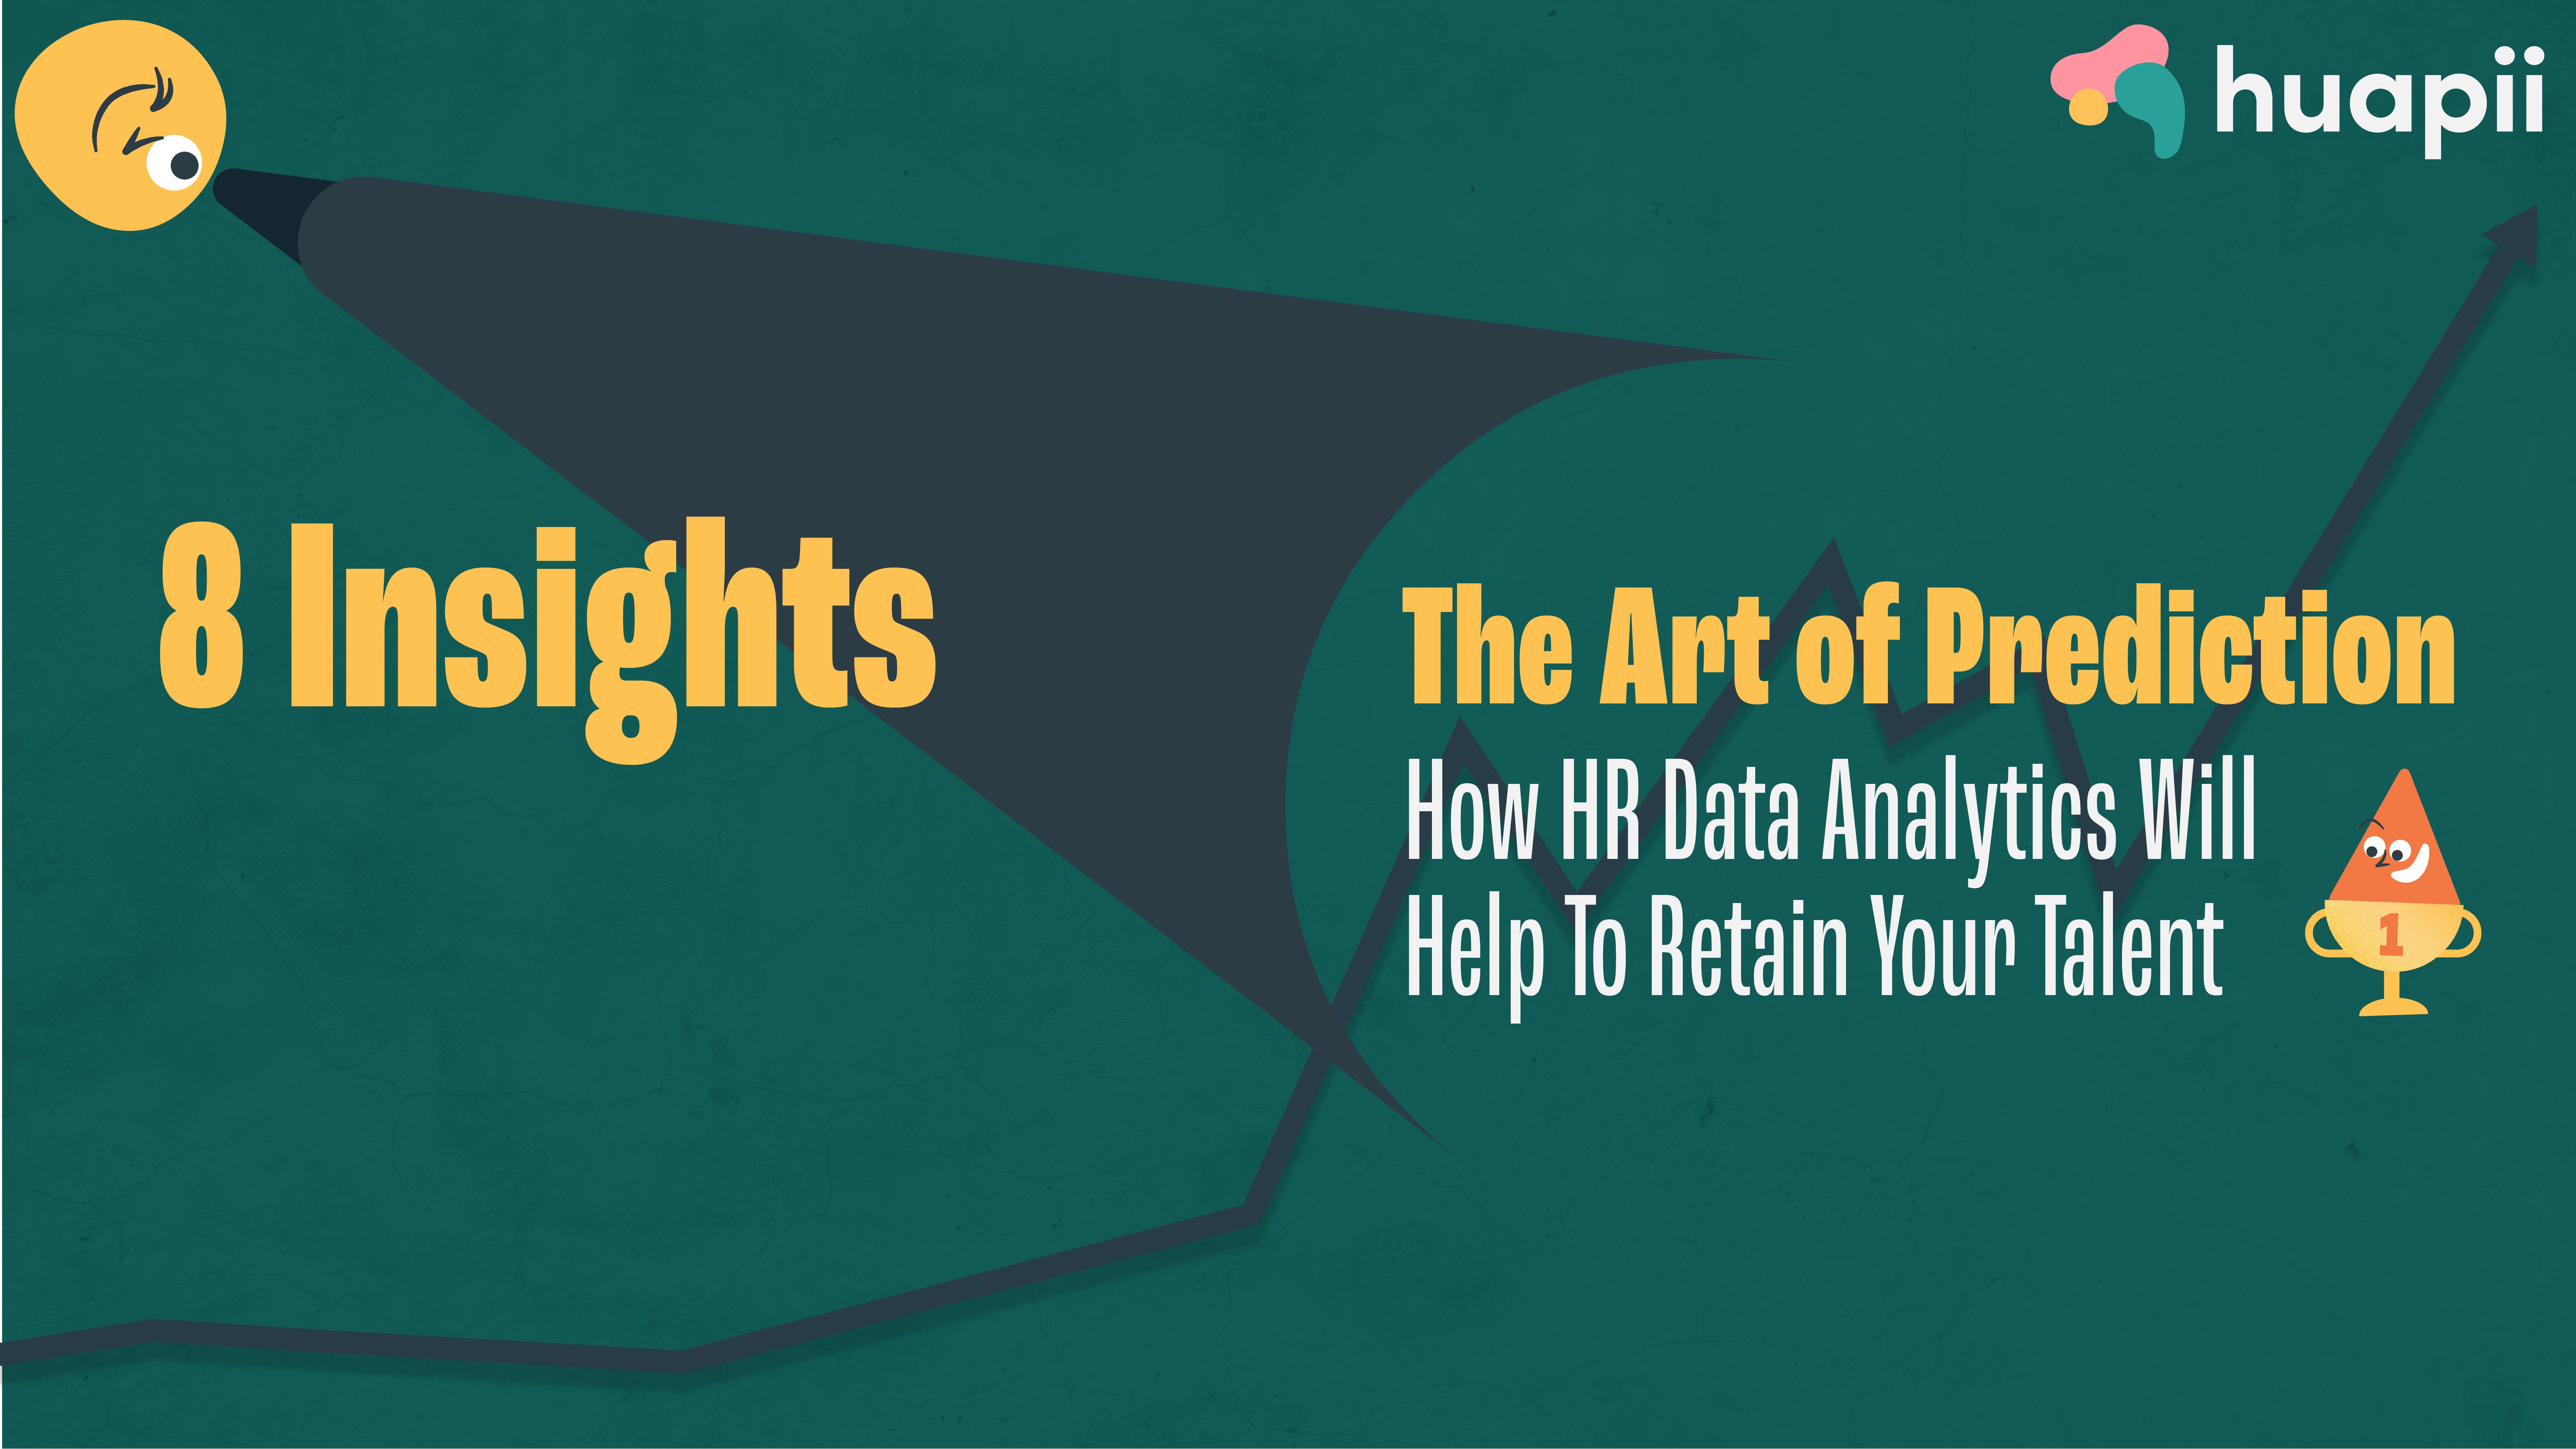 The Art of Prediction: 8 Insights on Leveraging HR Data huapii